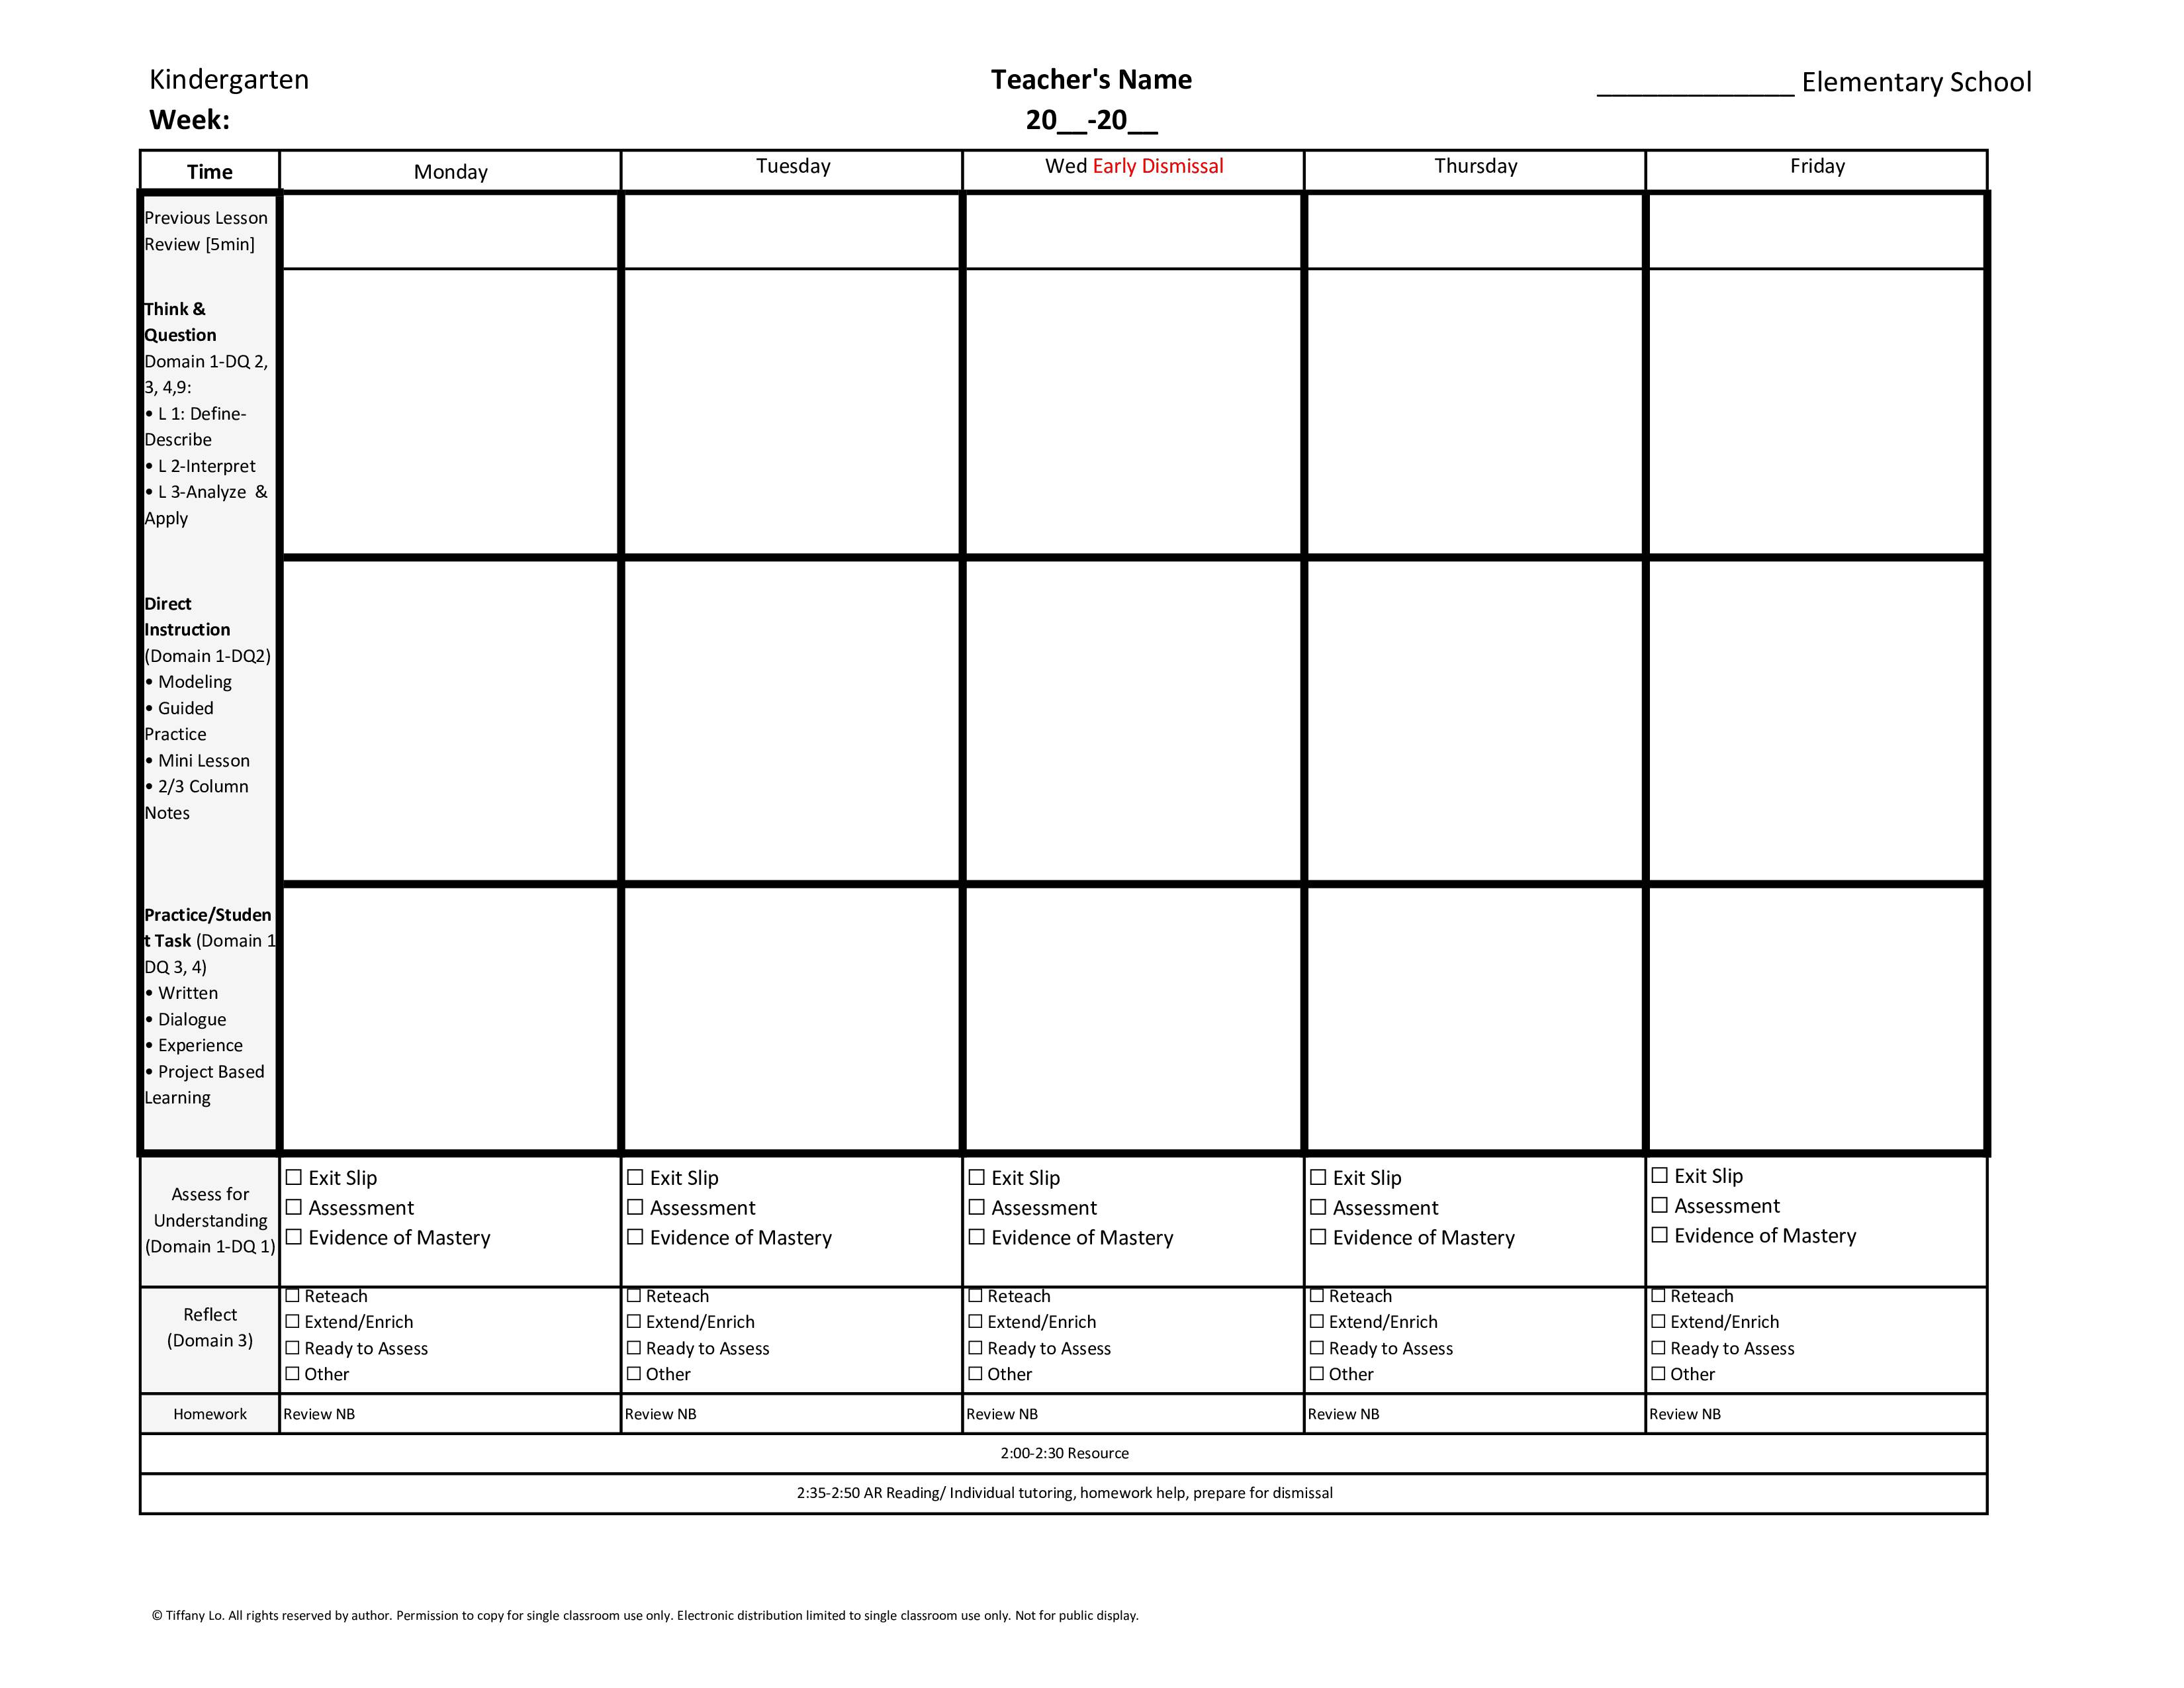 kindergarten-common-core-weekly-lesson-plan-template-w-drop-down-lists